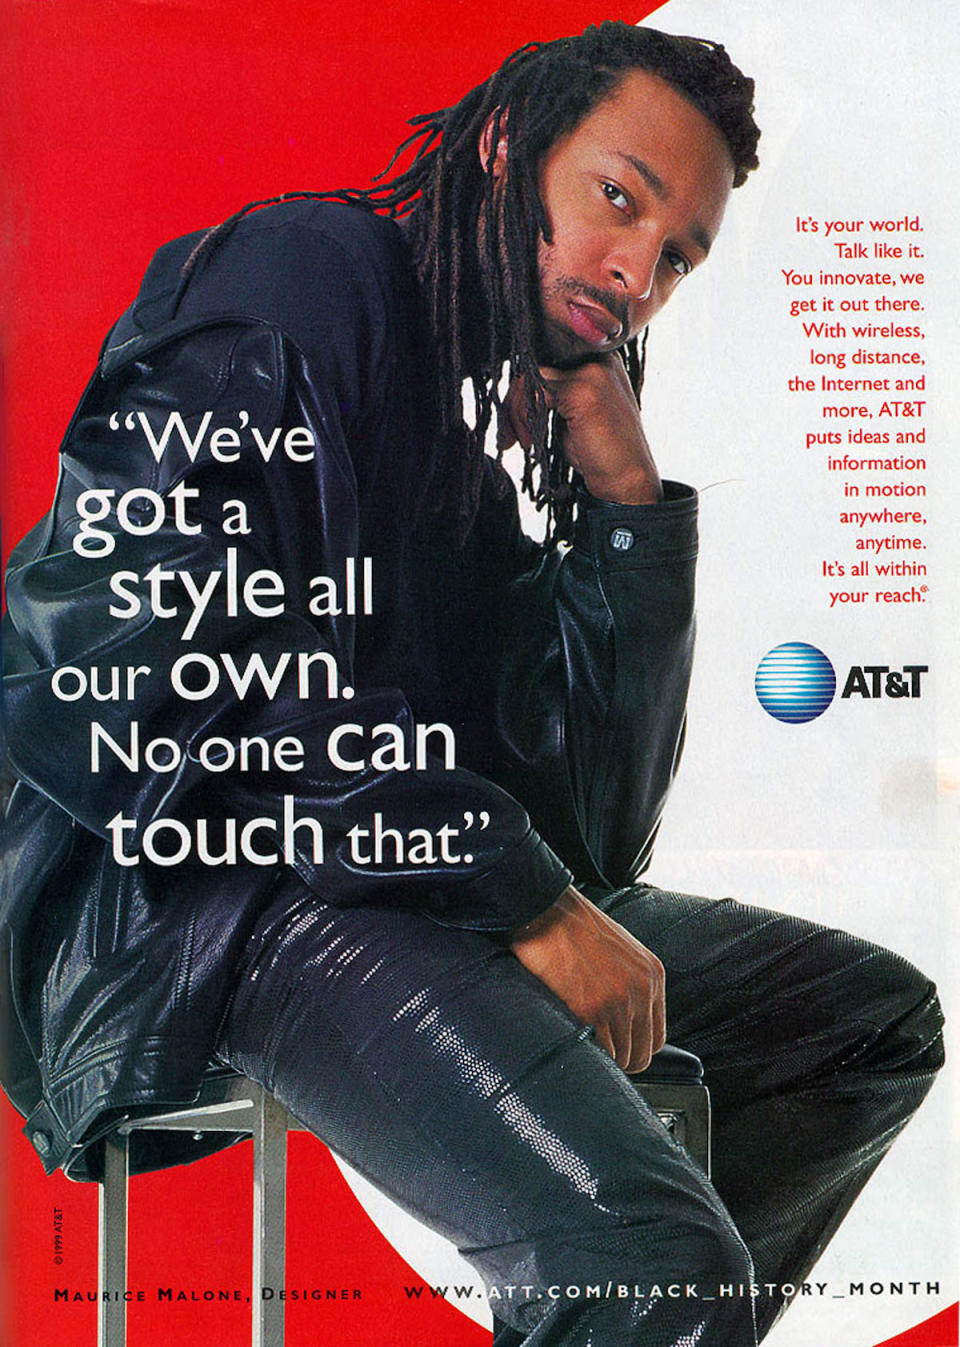 A 1999 Black History Month advertisement for AT&T featuring Malone.